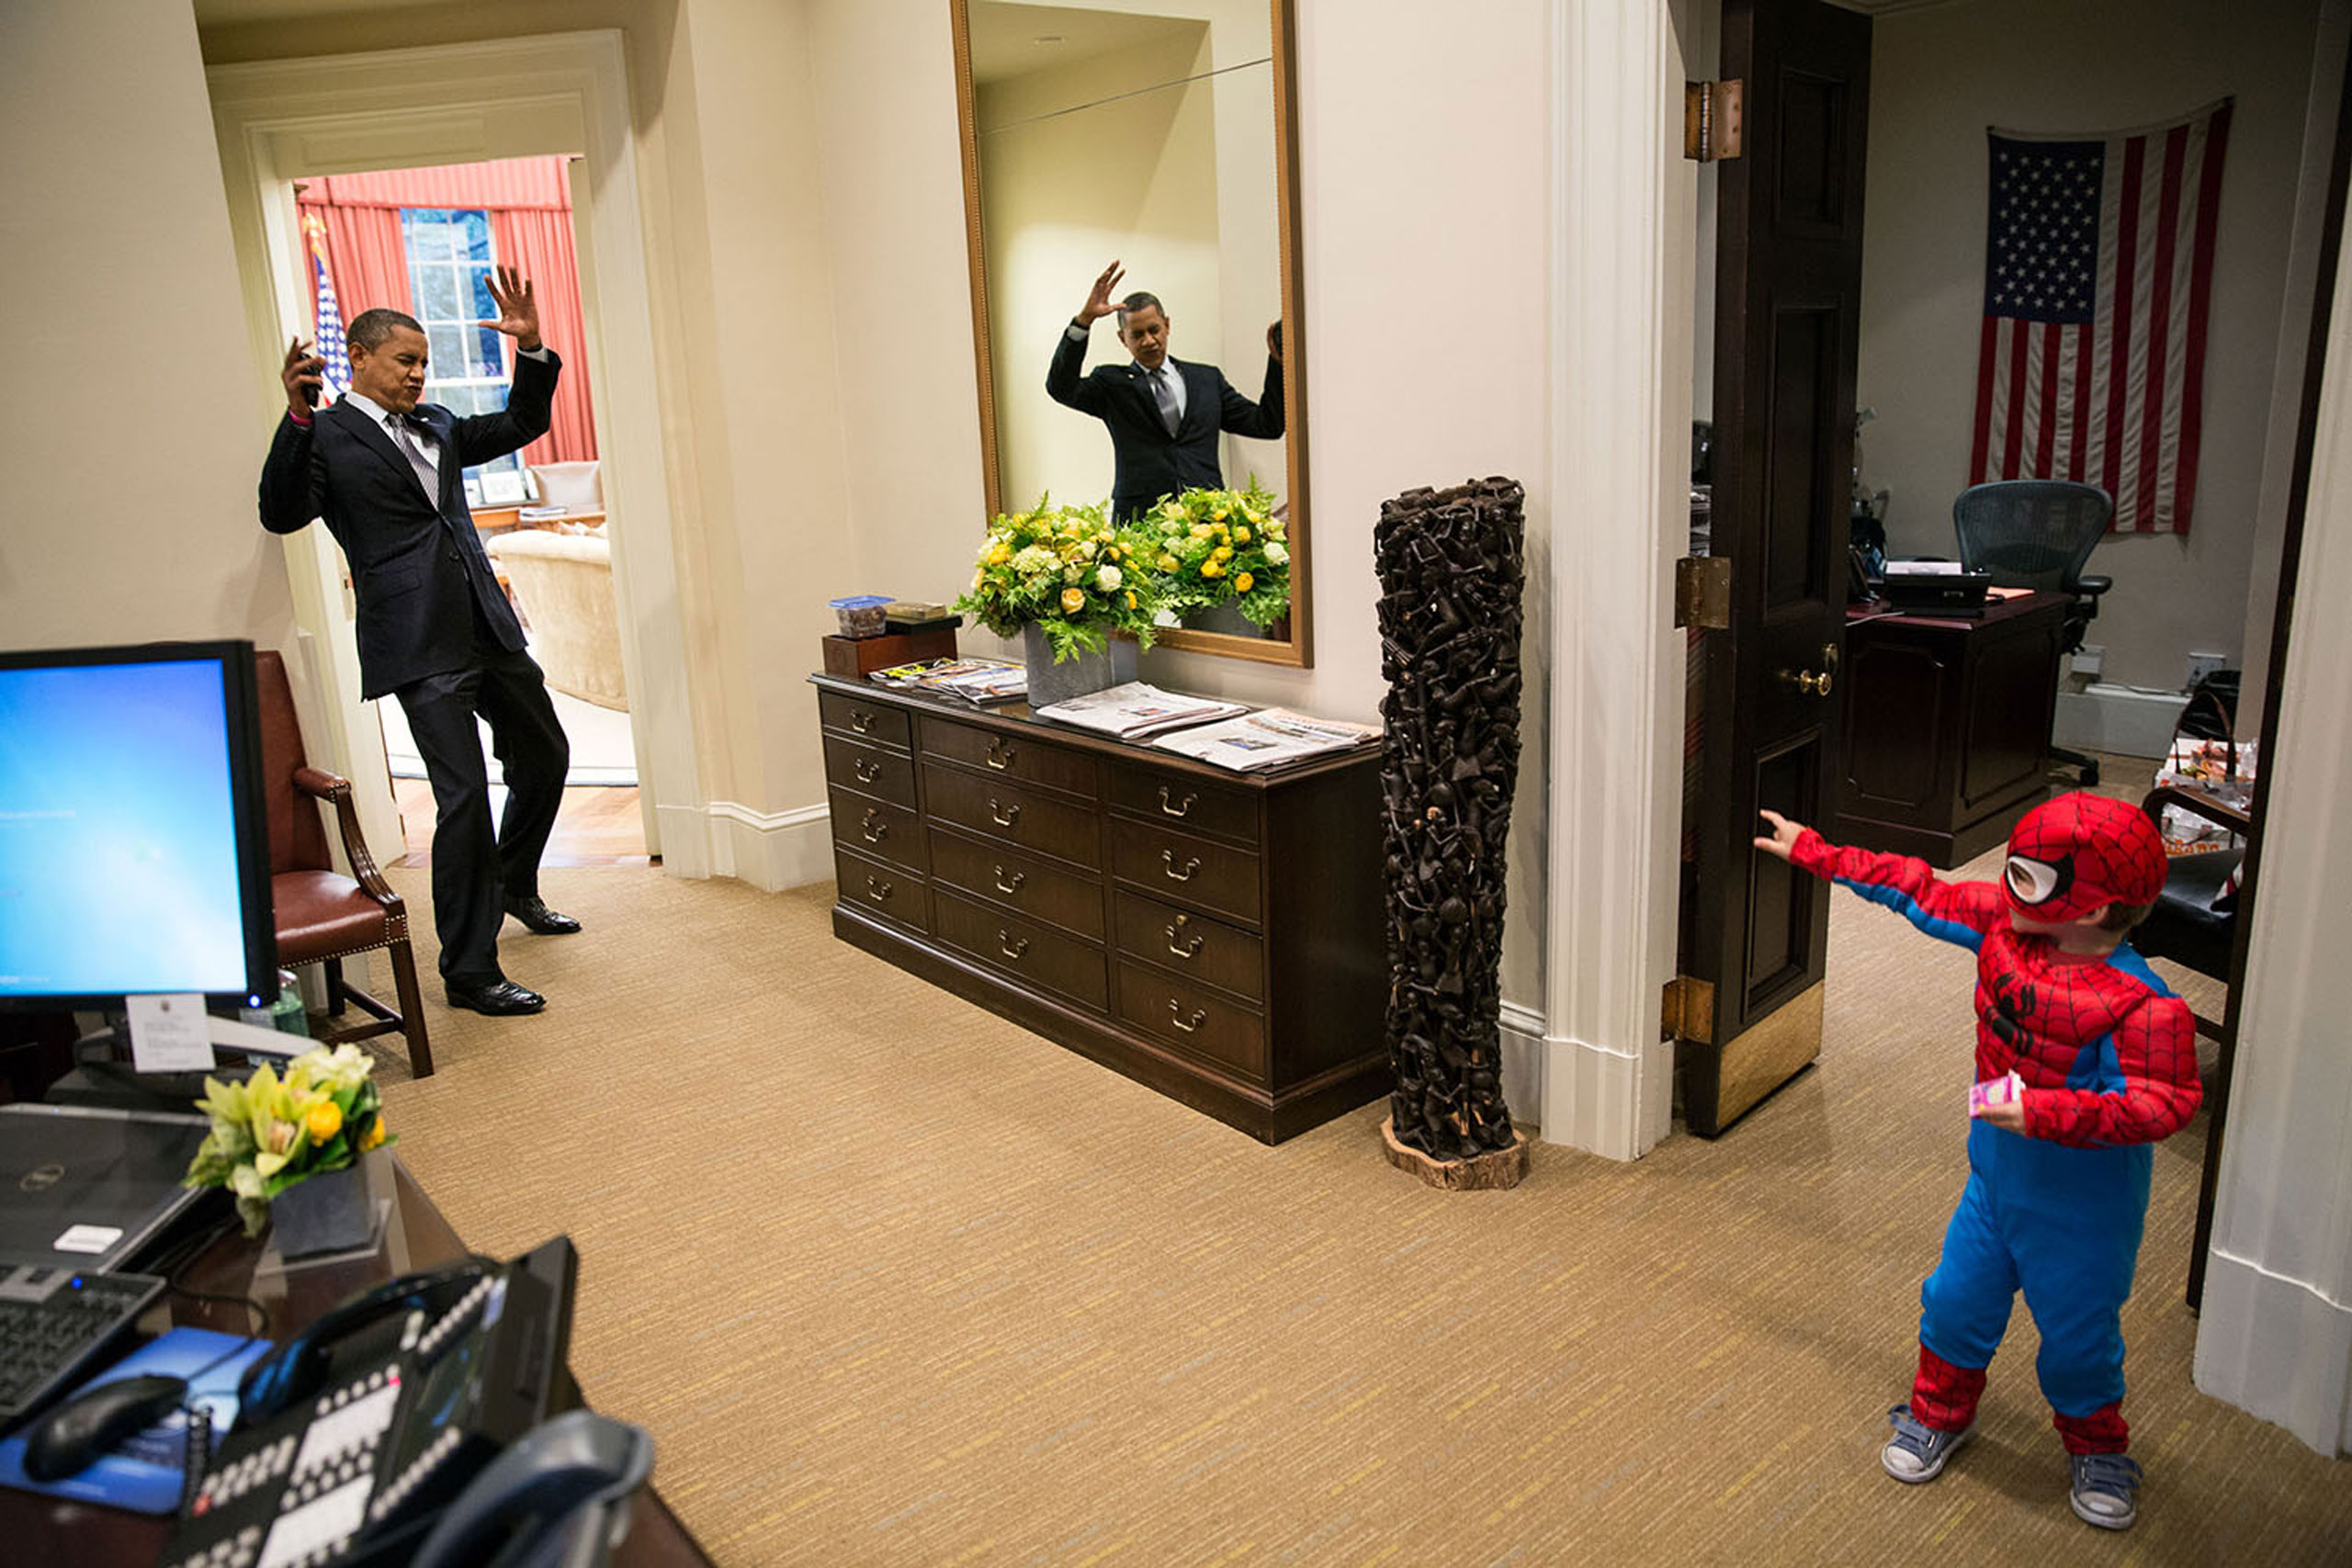 President Barack Obama pretends to be caught in Spider-Man's web as he greets the son of a White House staffer in the Outer Oval Office, Oct. 26, 2012.